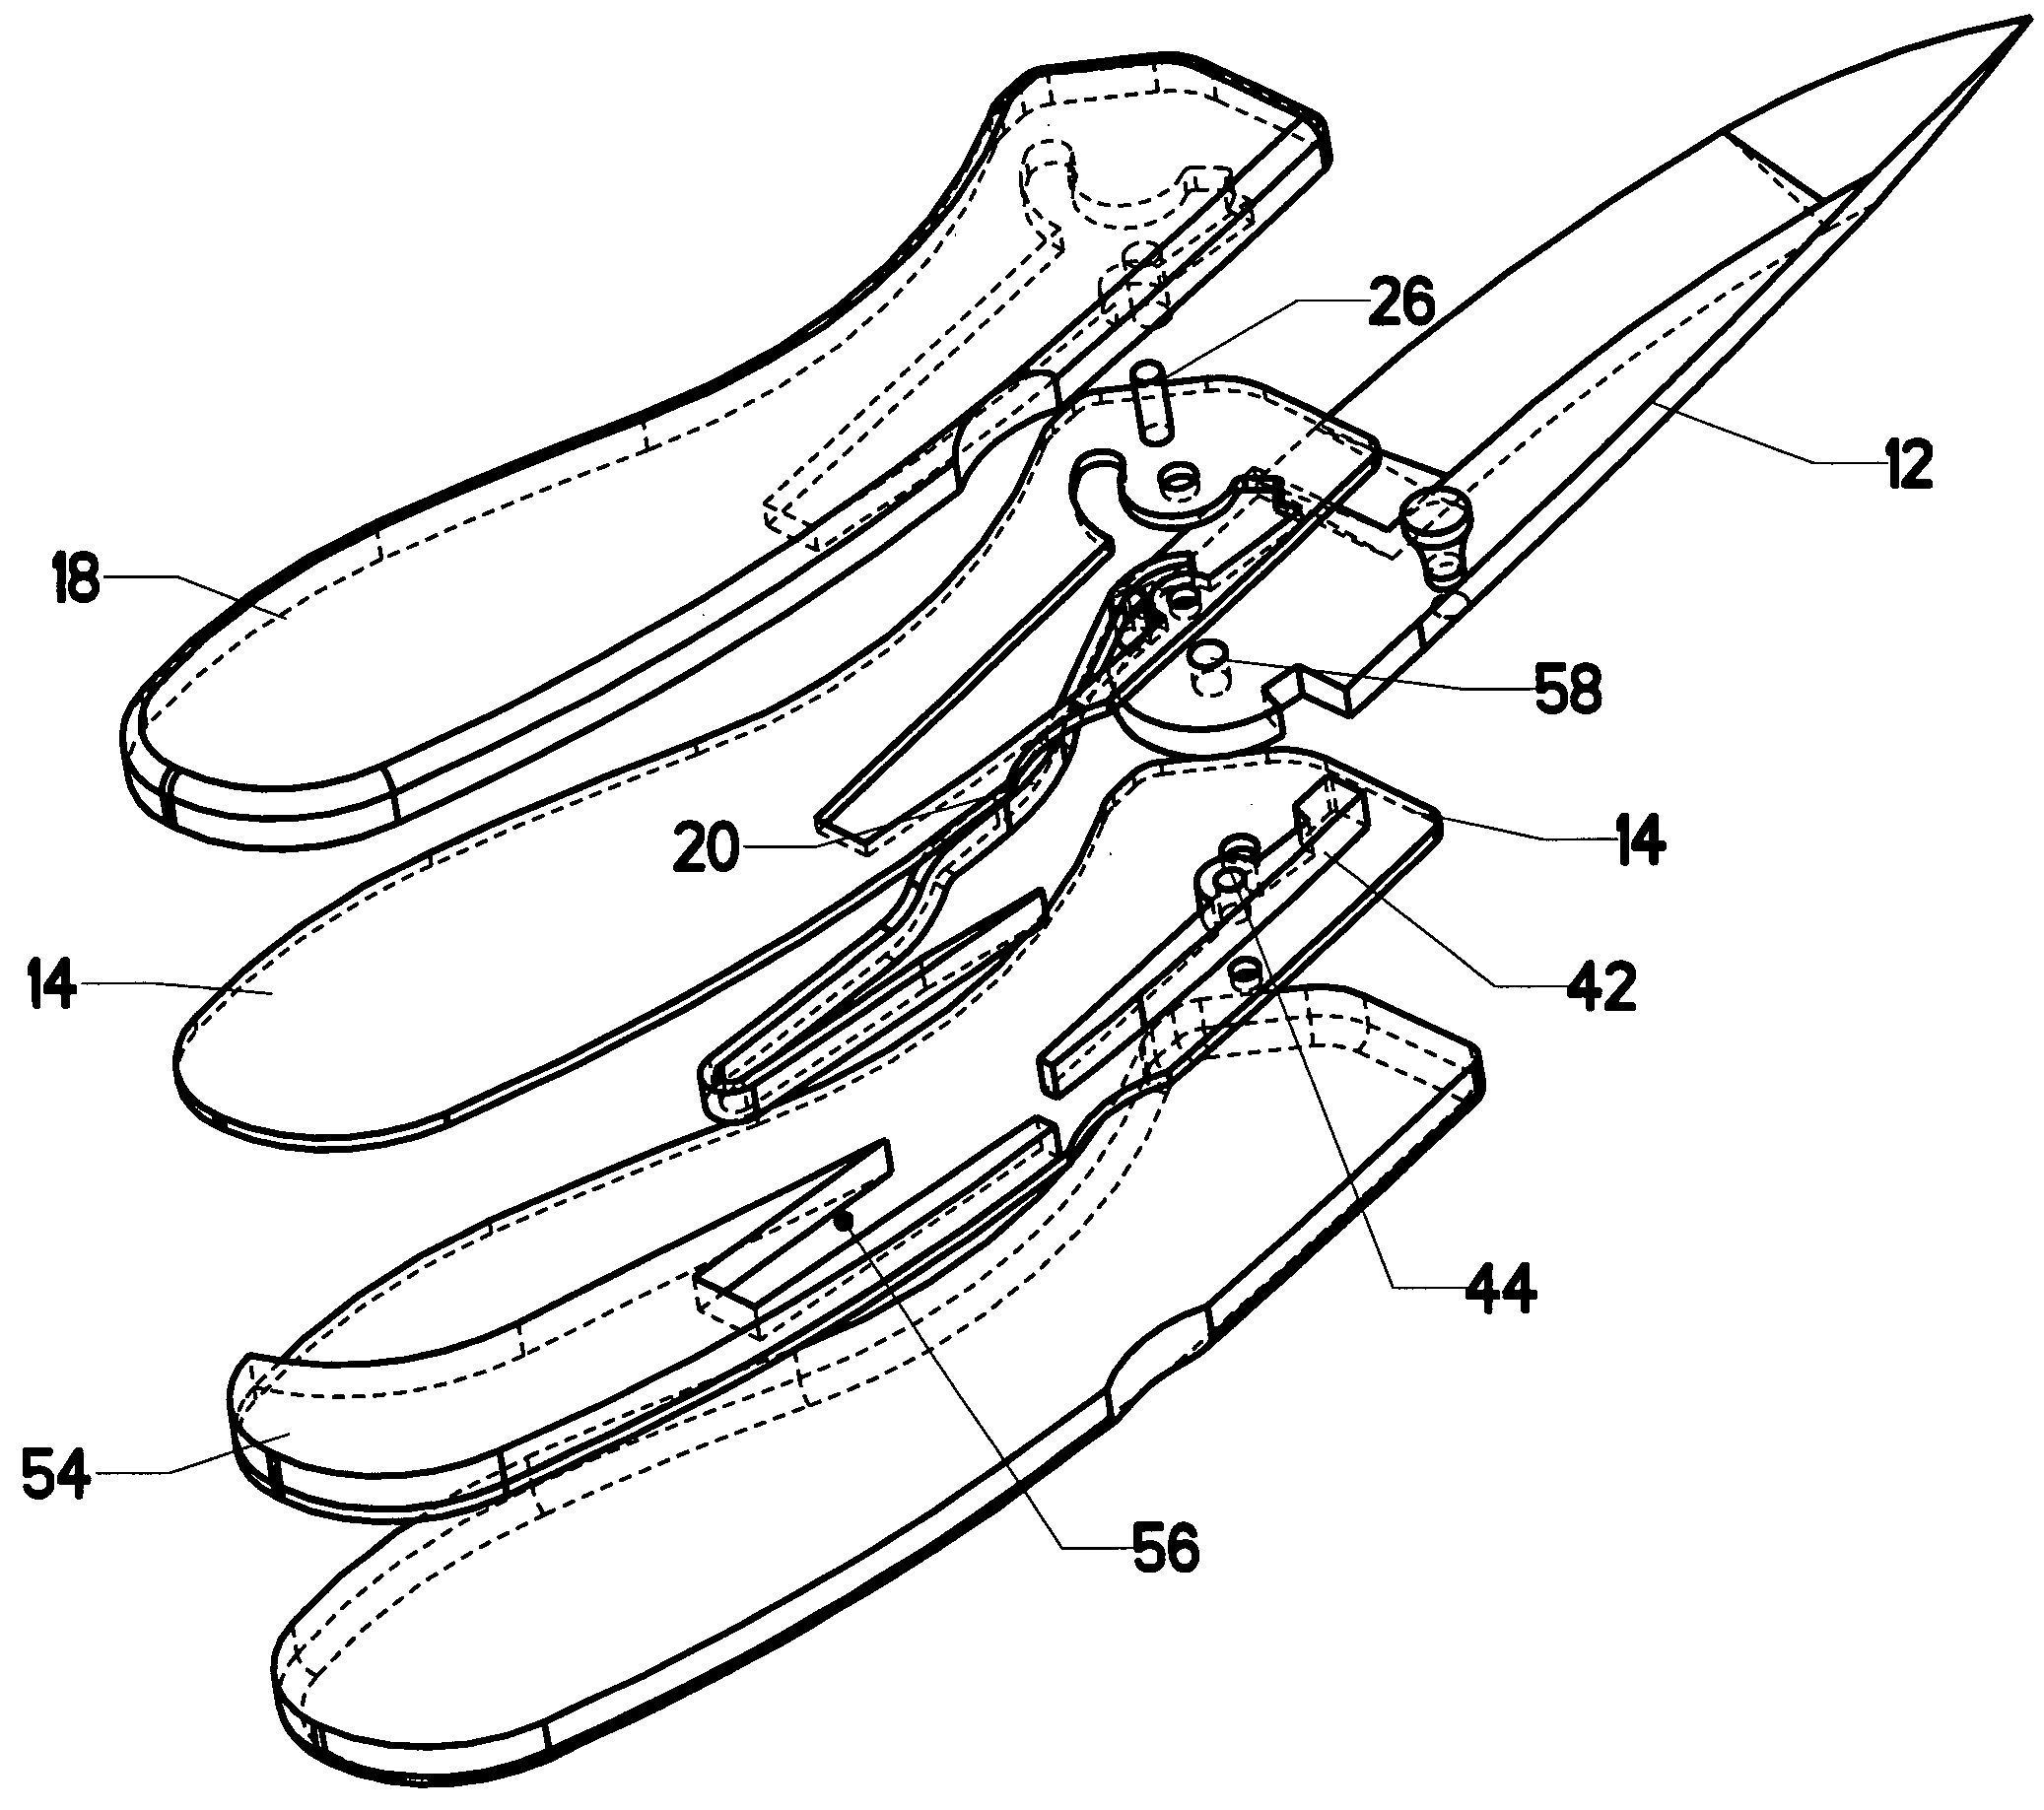 Knife with spring-assisted blade articulation mechanism